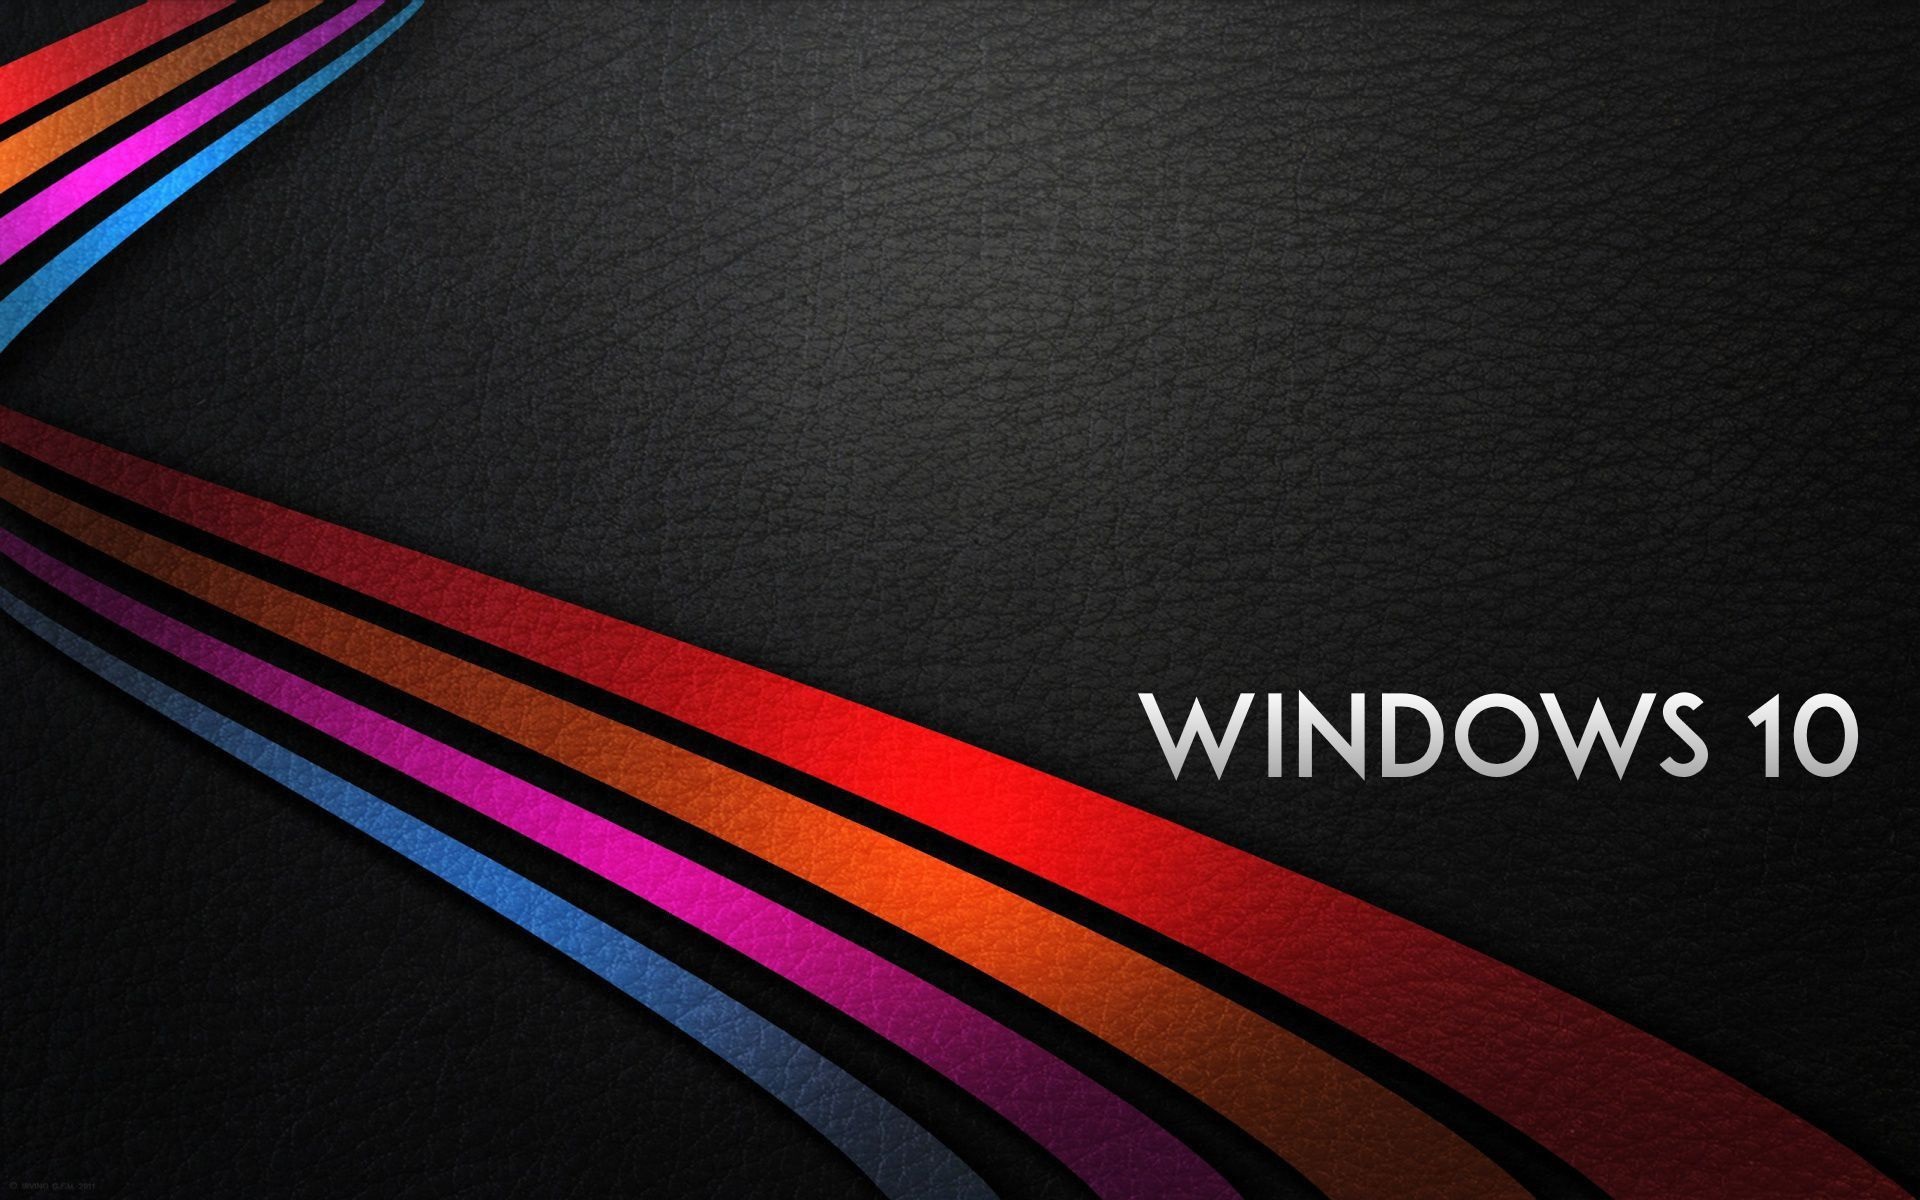 Wallpaper Windows 10 system, rainbow stripes background 1920x1200 HD Picture, Image